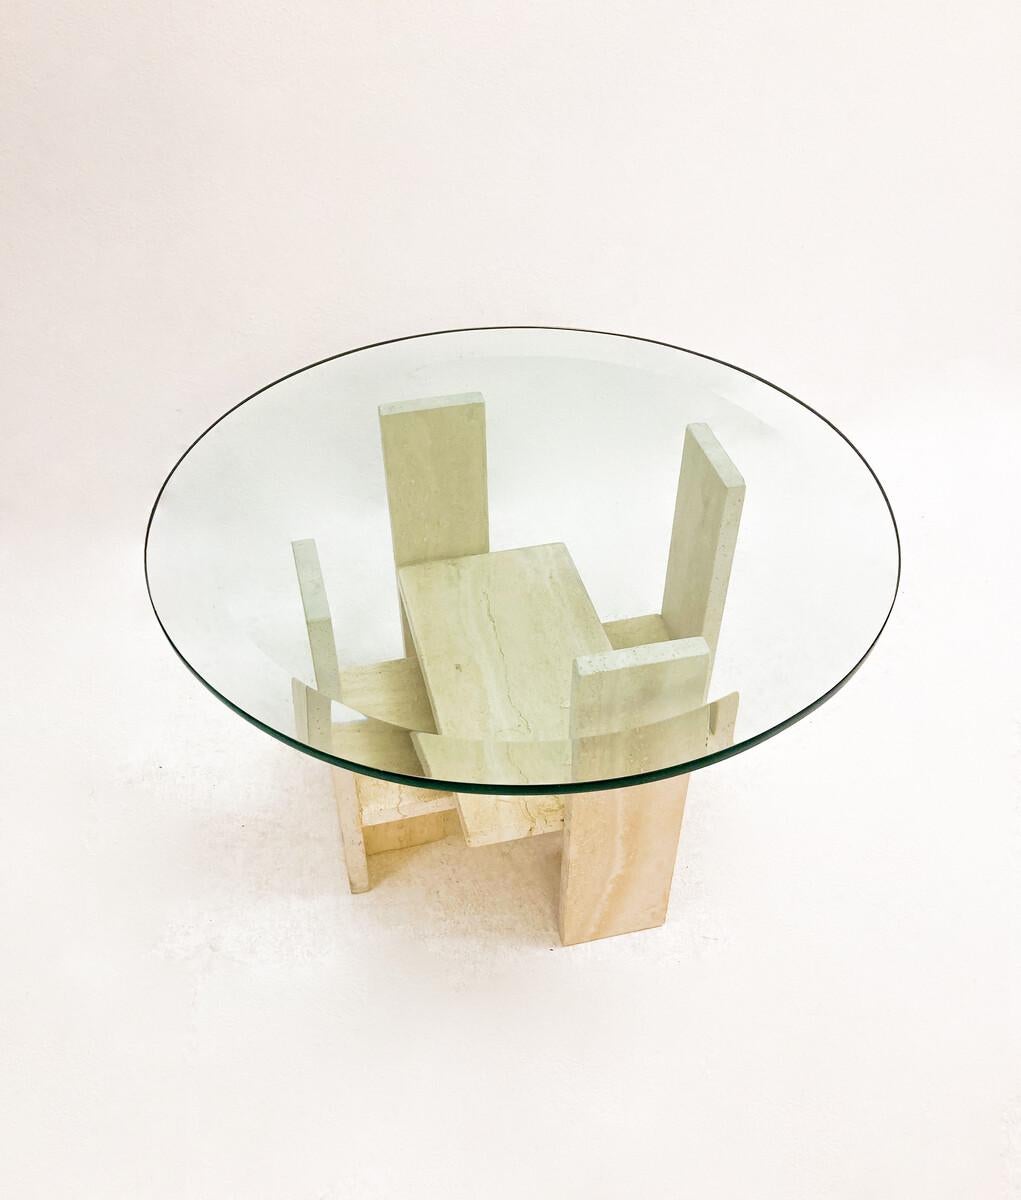 Late 20th Century Mid-Century Modern Glass and Travertine Coffee Table by Willy Ballez, 1970s For Sale